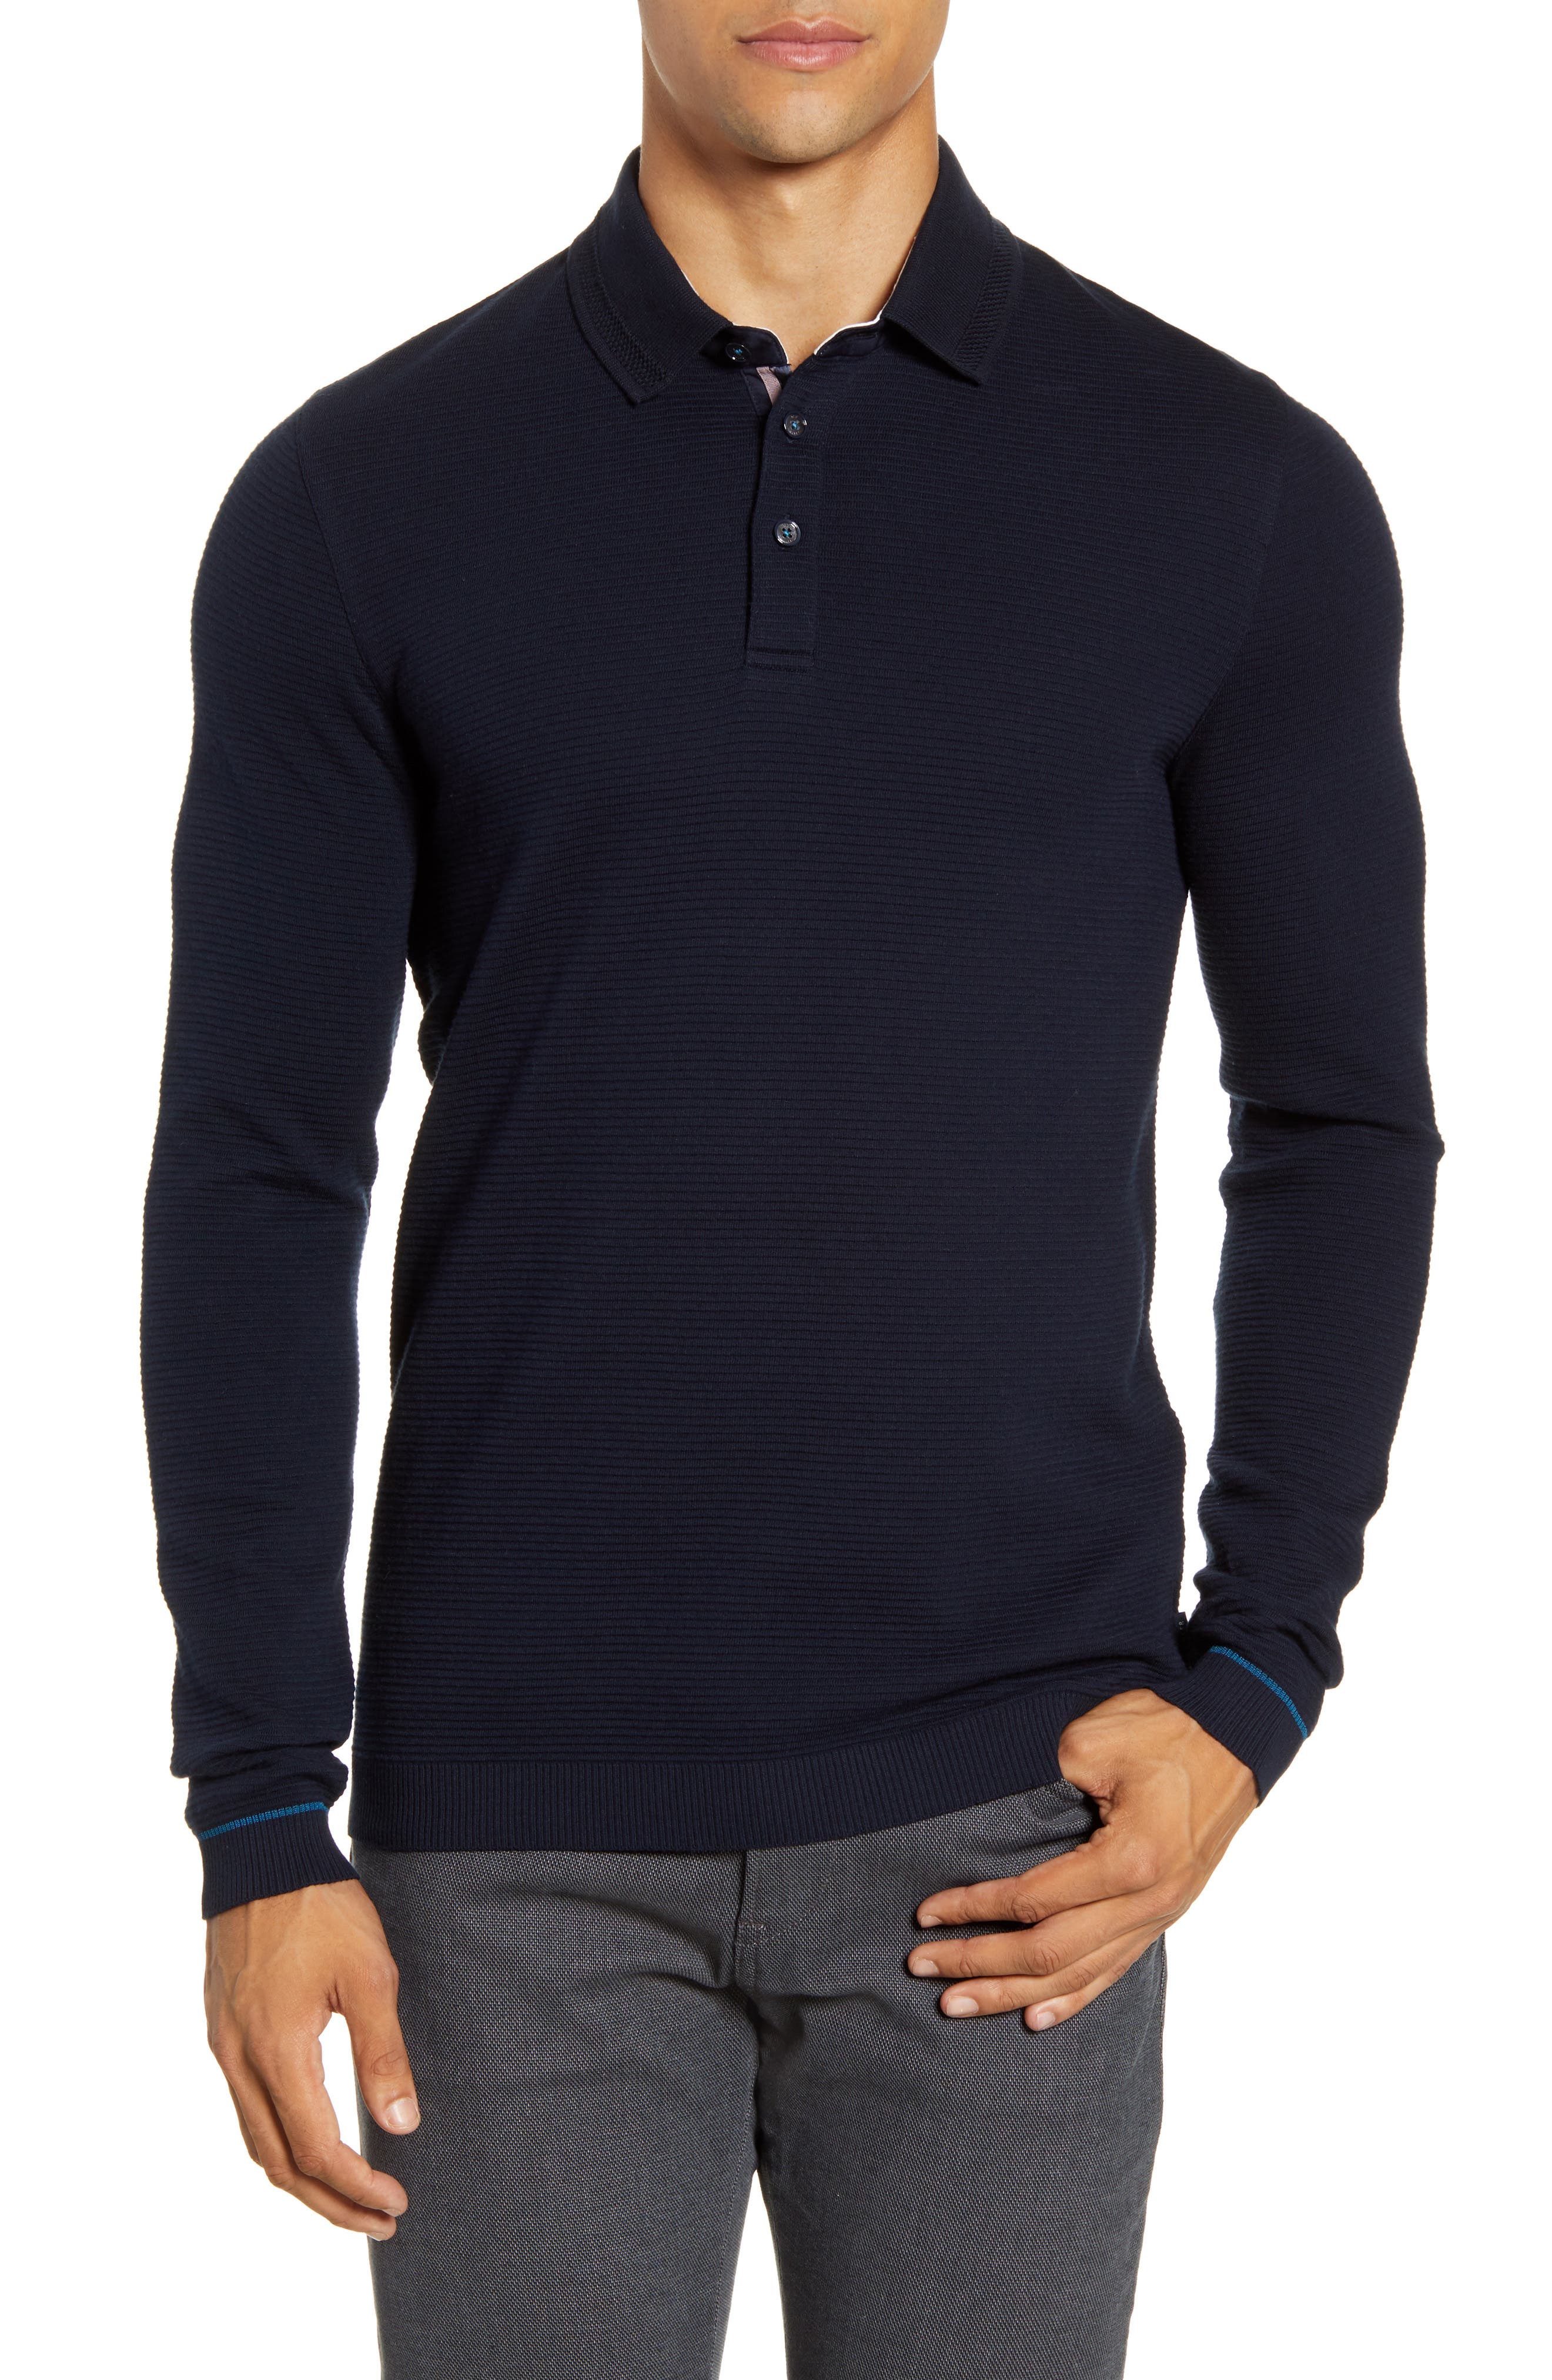 TED BAKER TERNED LONG SLEEVE KNIT POLO,5057930845084